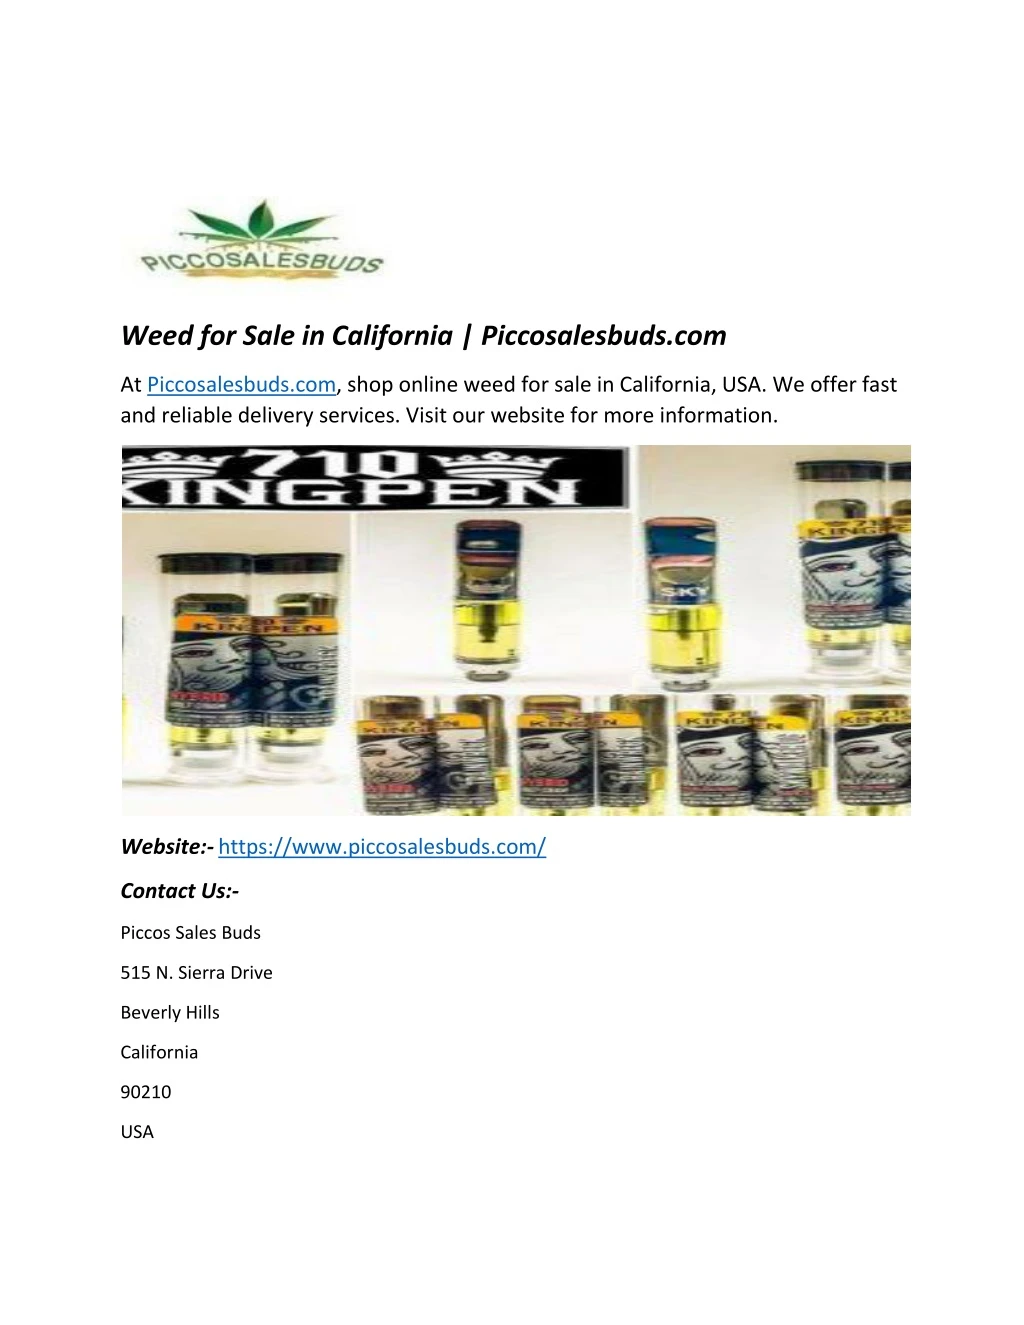 weed for sale in california piccosalesbuds com